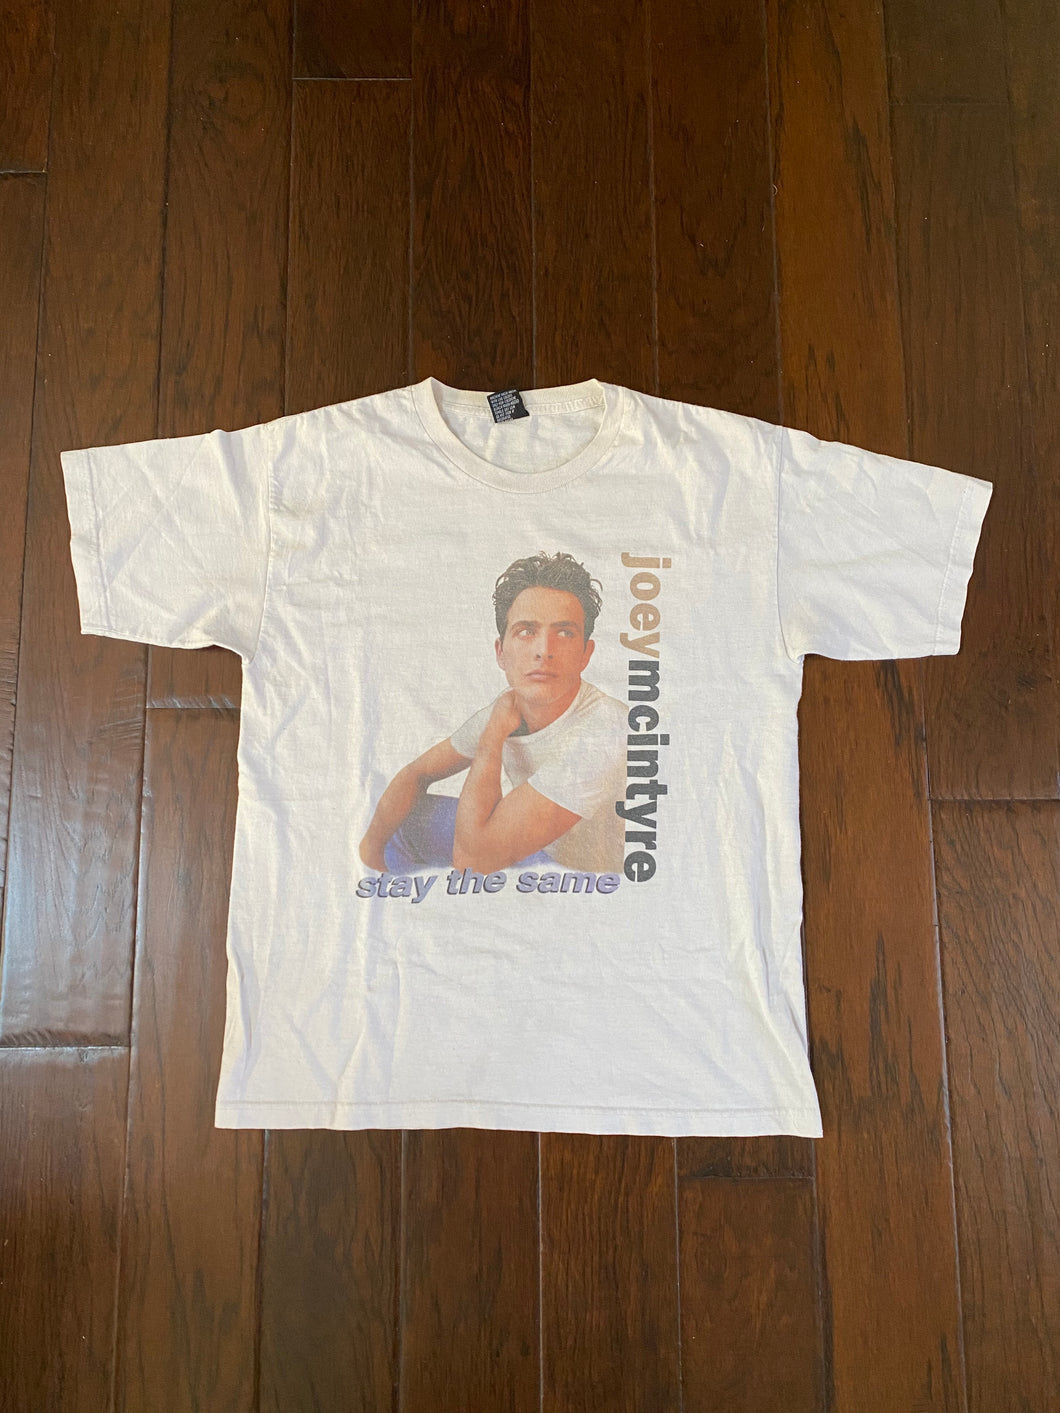 Joey McIntyre 1999 “Stay The Same” Vintage Distressed Tour T-shirt